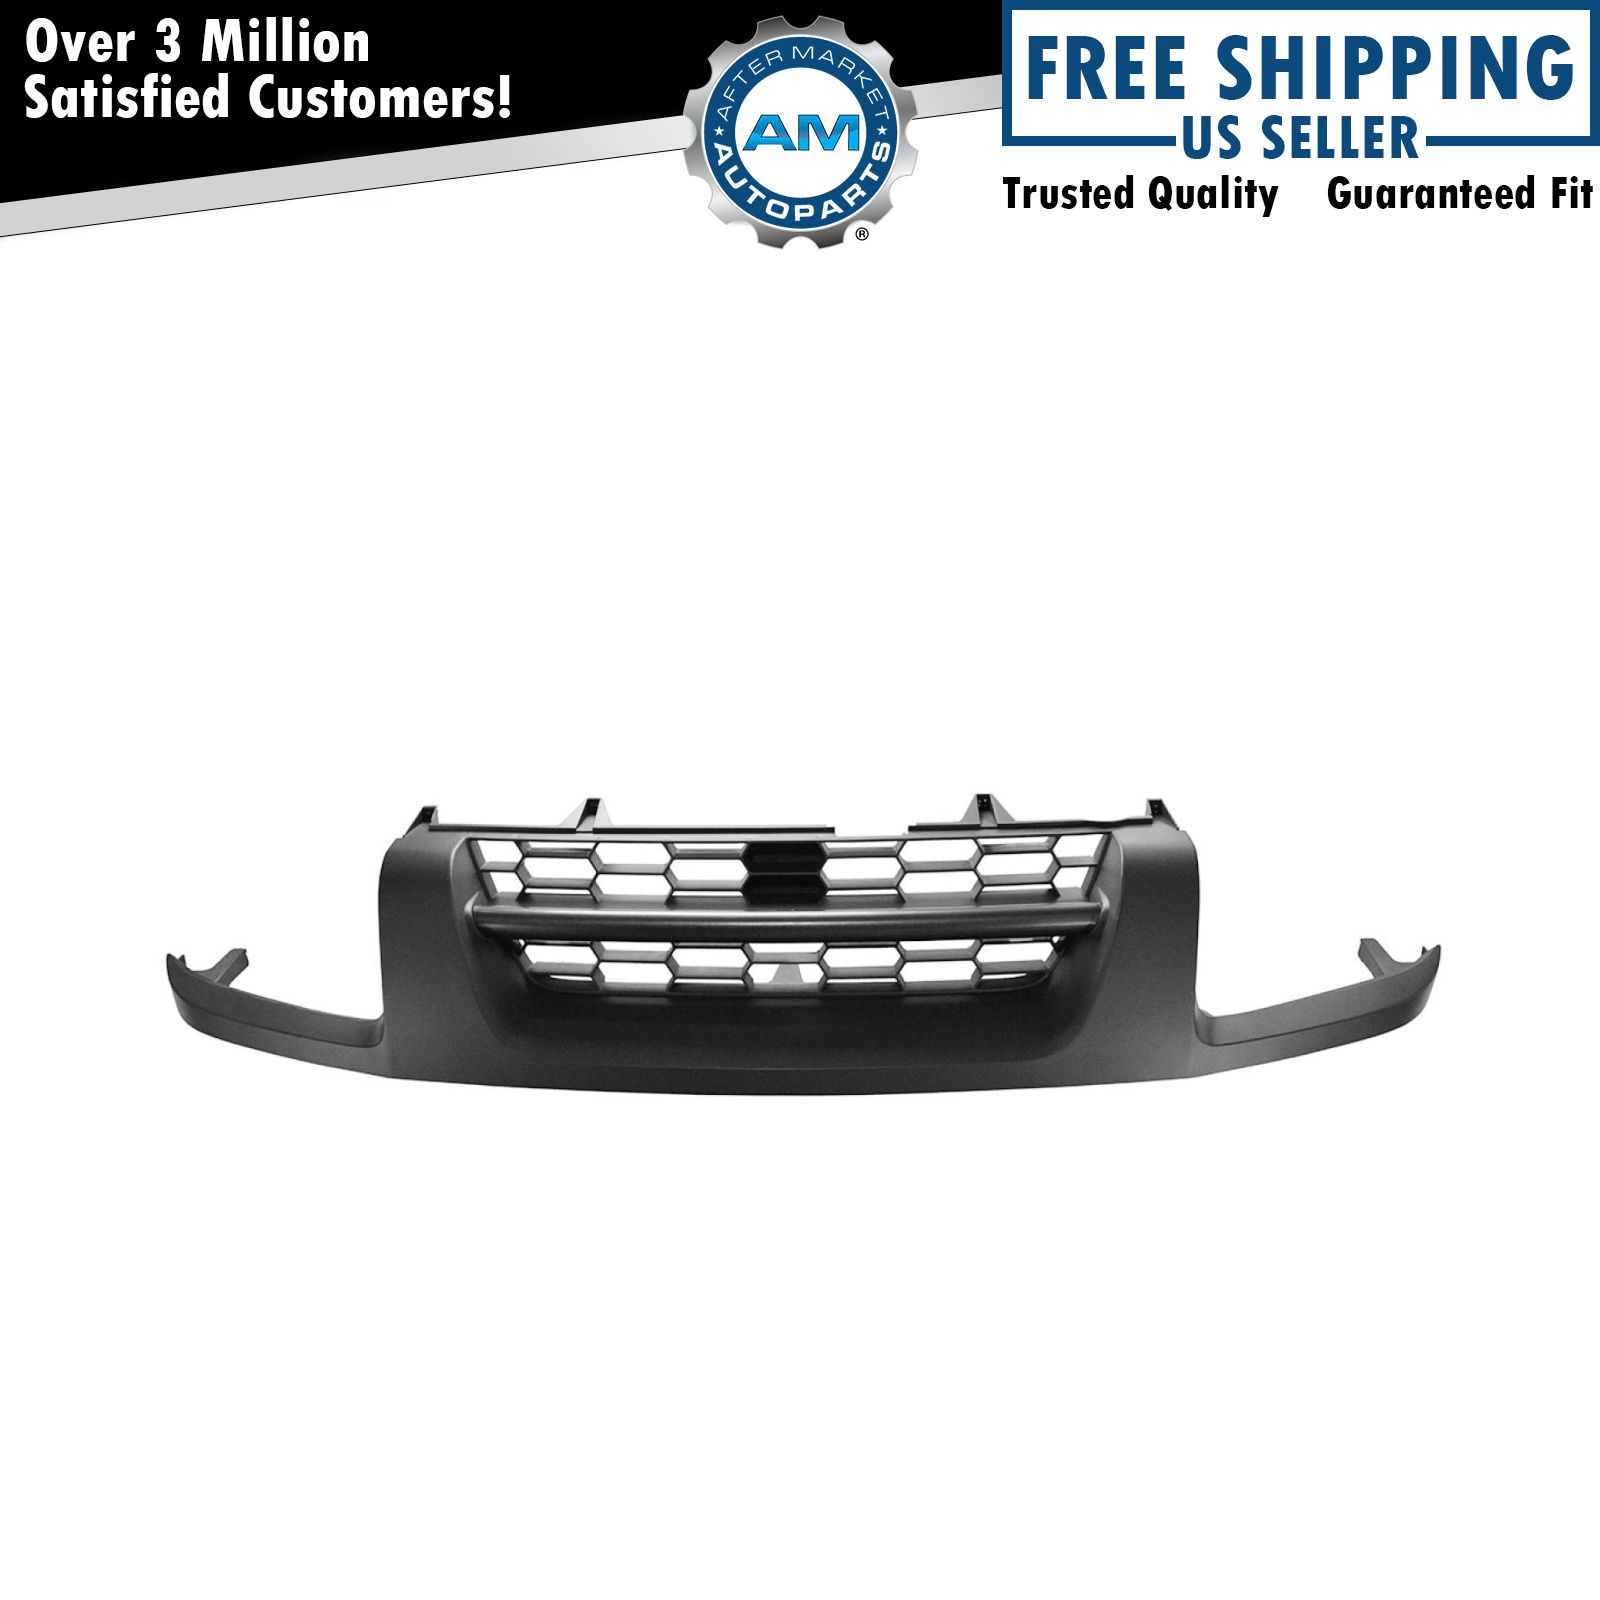 Front Grille Silver & Gray For 2002-2004 Nissan Xterra NI1200198 NI1200199